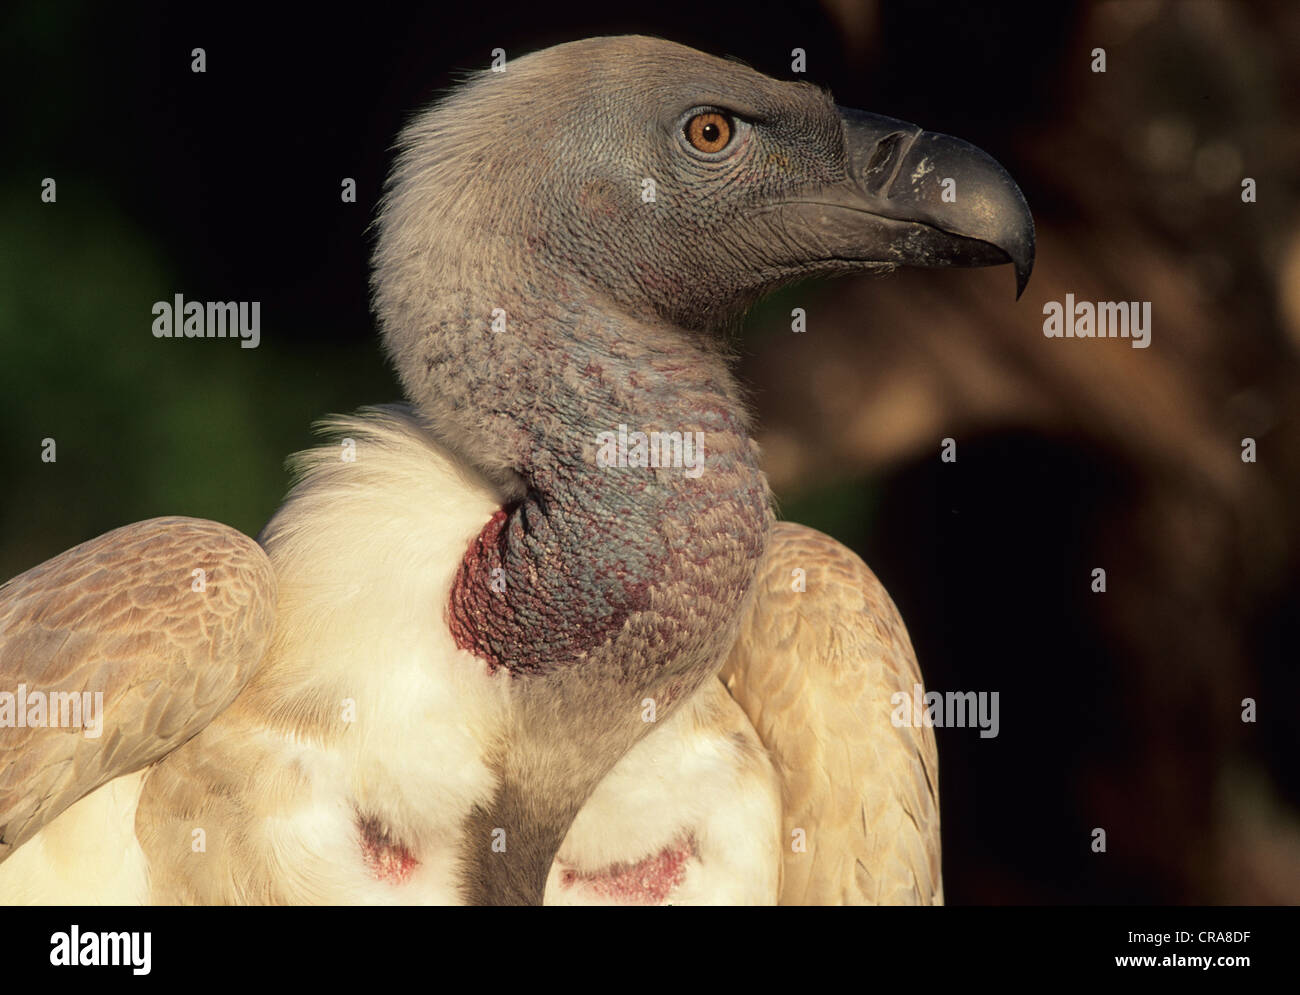 Cape Vulture (Gyps coprotheres), endangered species, KwaZulu-Natal, South Africa, Africa Stock Photo